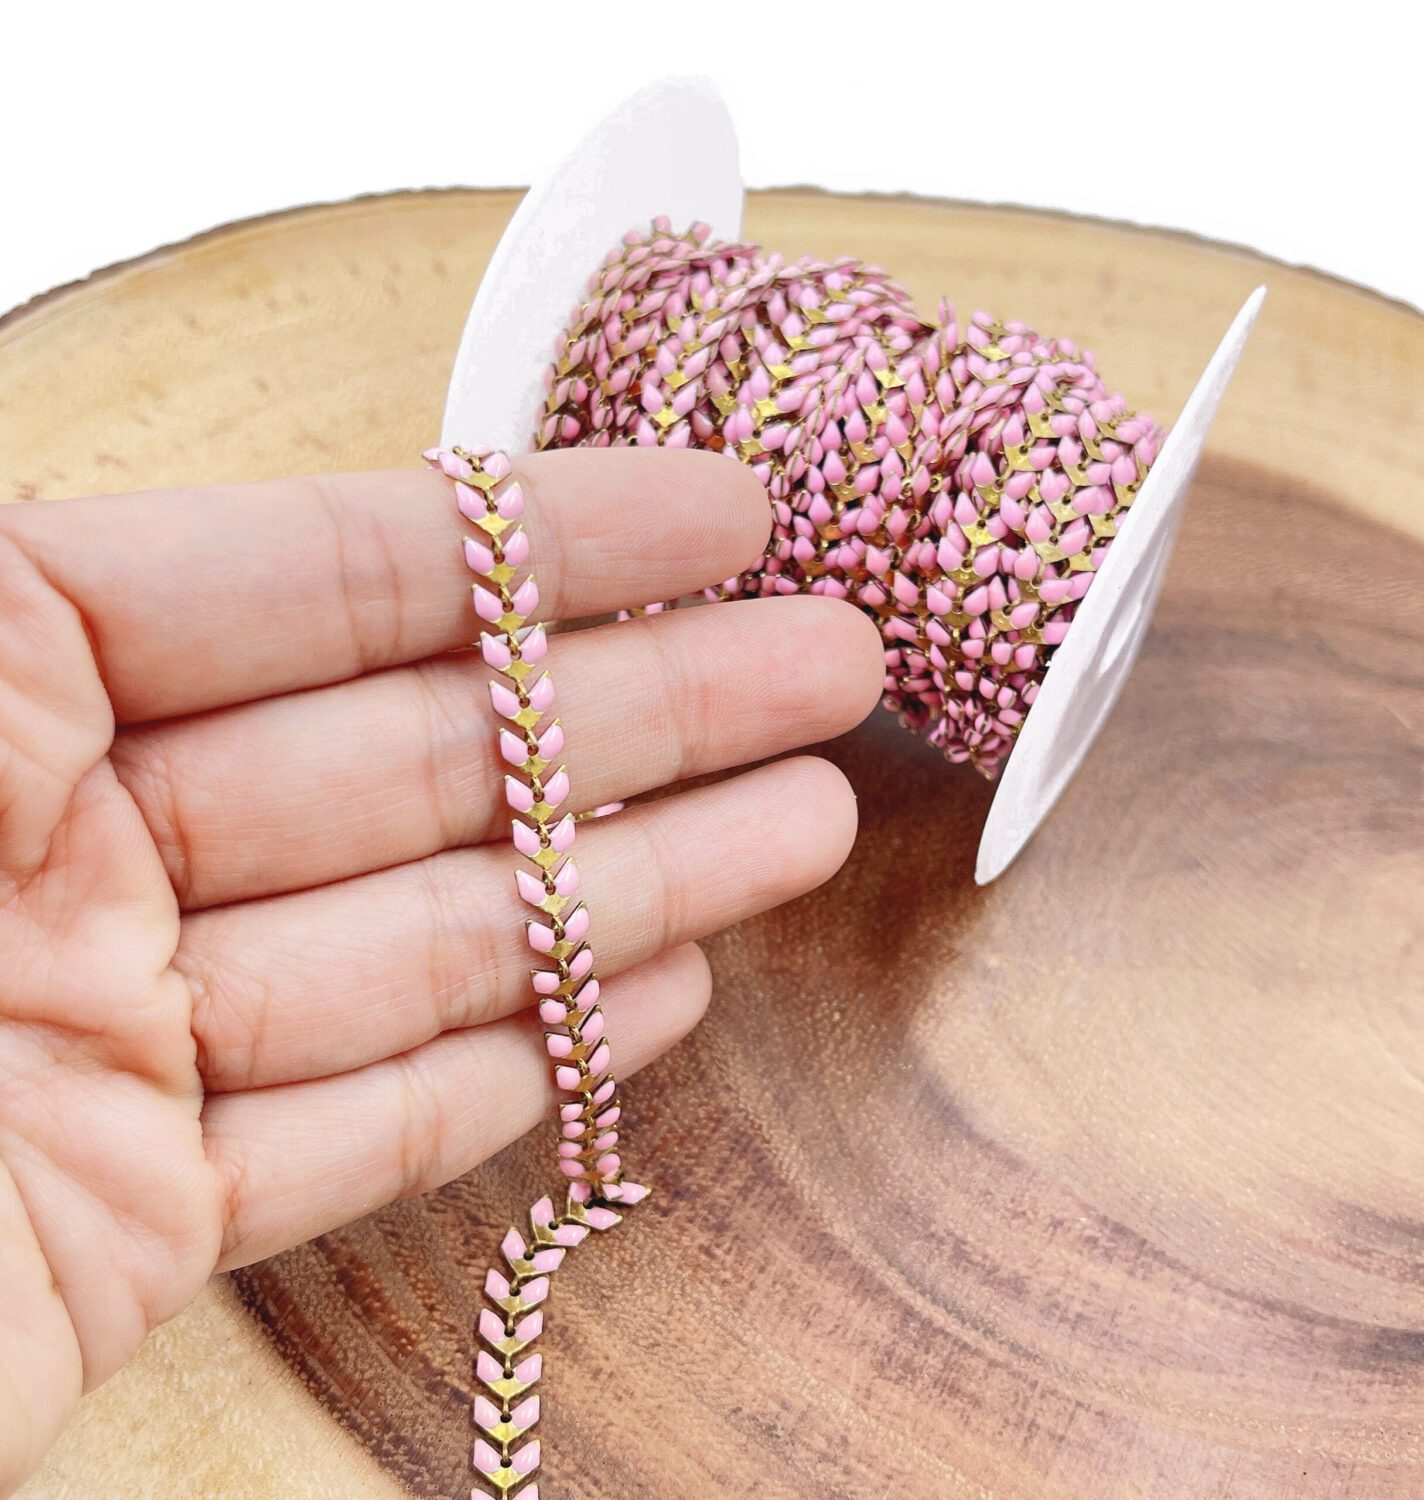 Permanent Jewelry Trend, Jewelry Making Chains Supplies Wholesaler